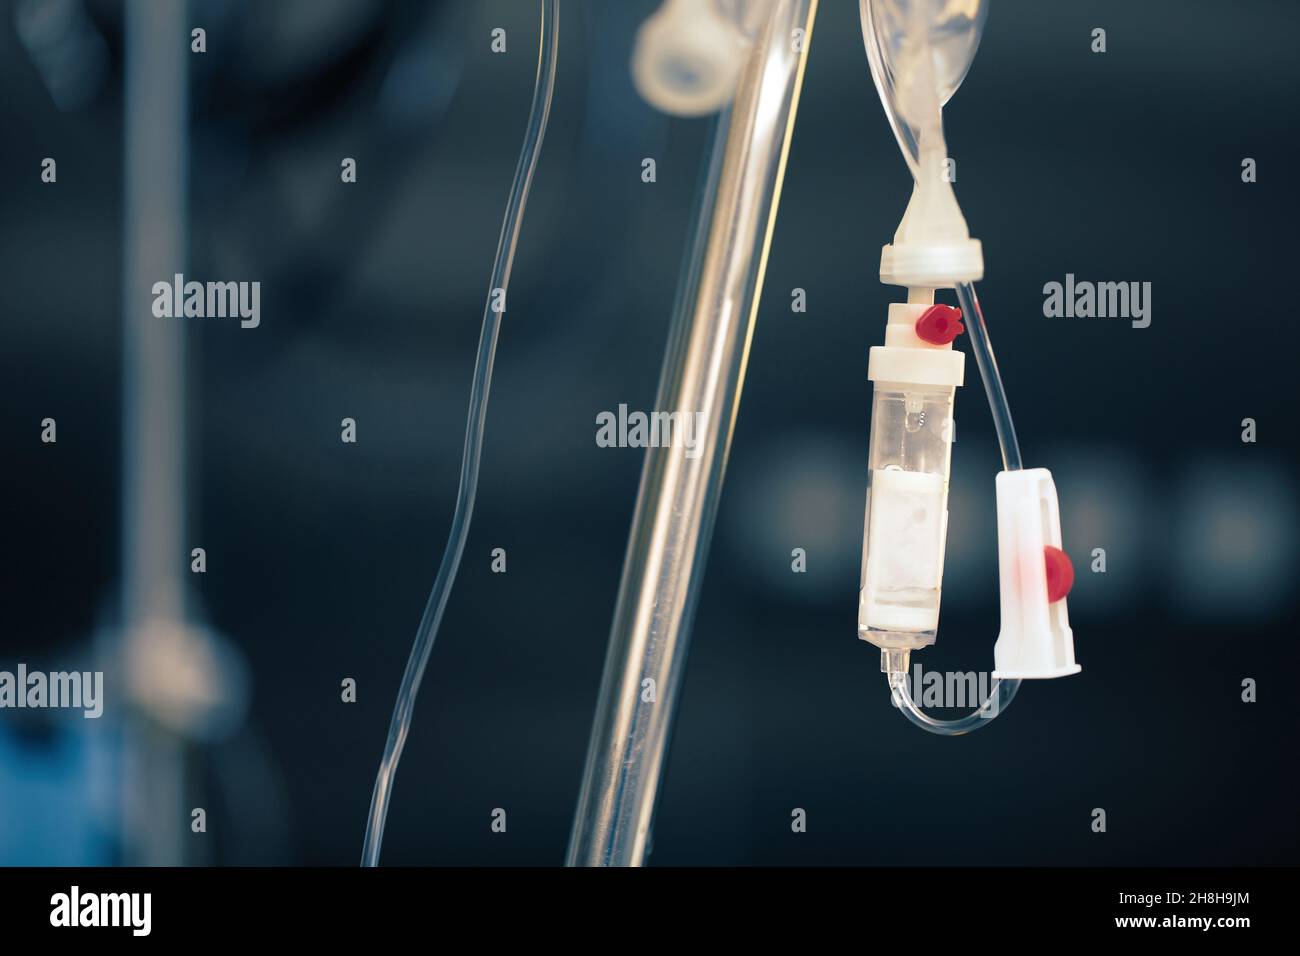 Part of a medical drip in the hospital room. Stock Photo